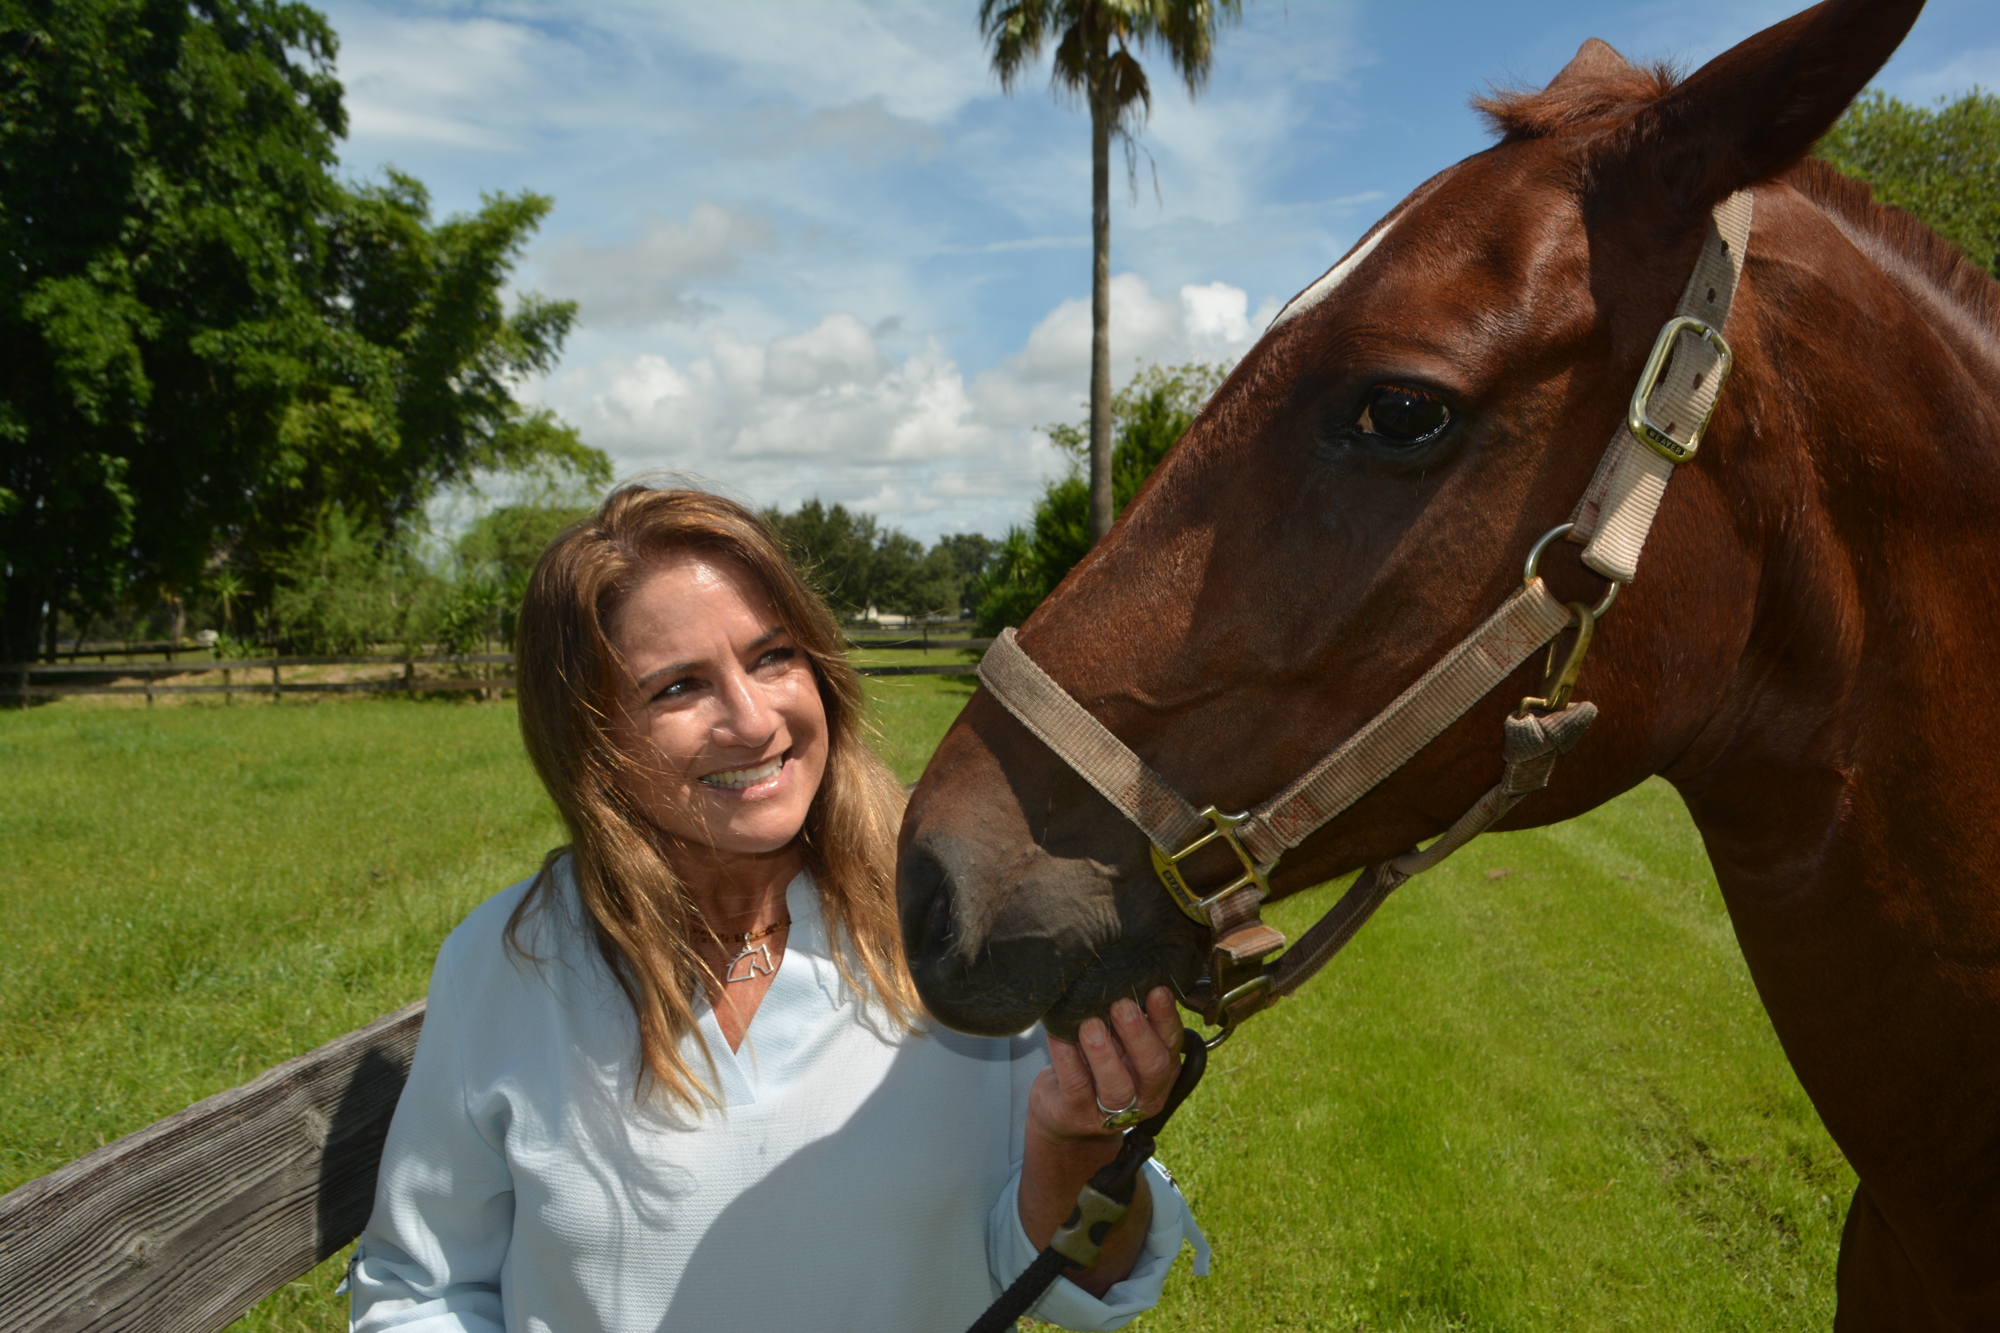 Jaymie Klauber will expand her barn to 12 horses as she opens Epic Equine Experiences.